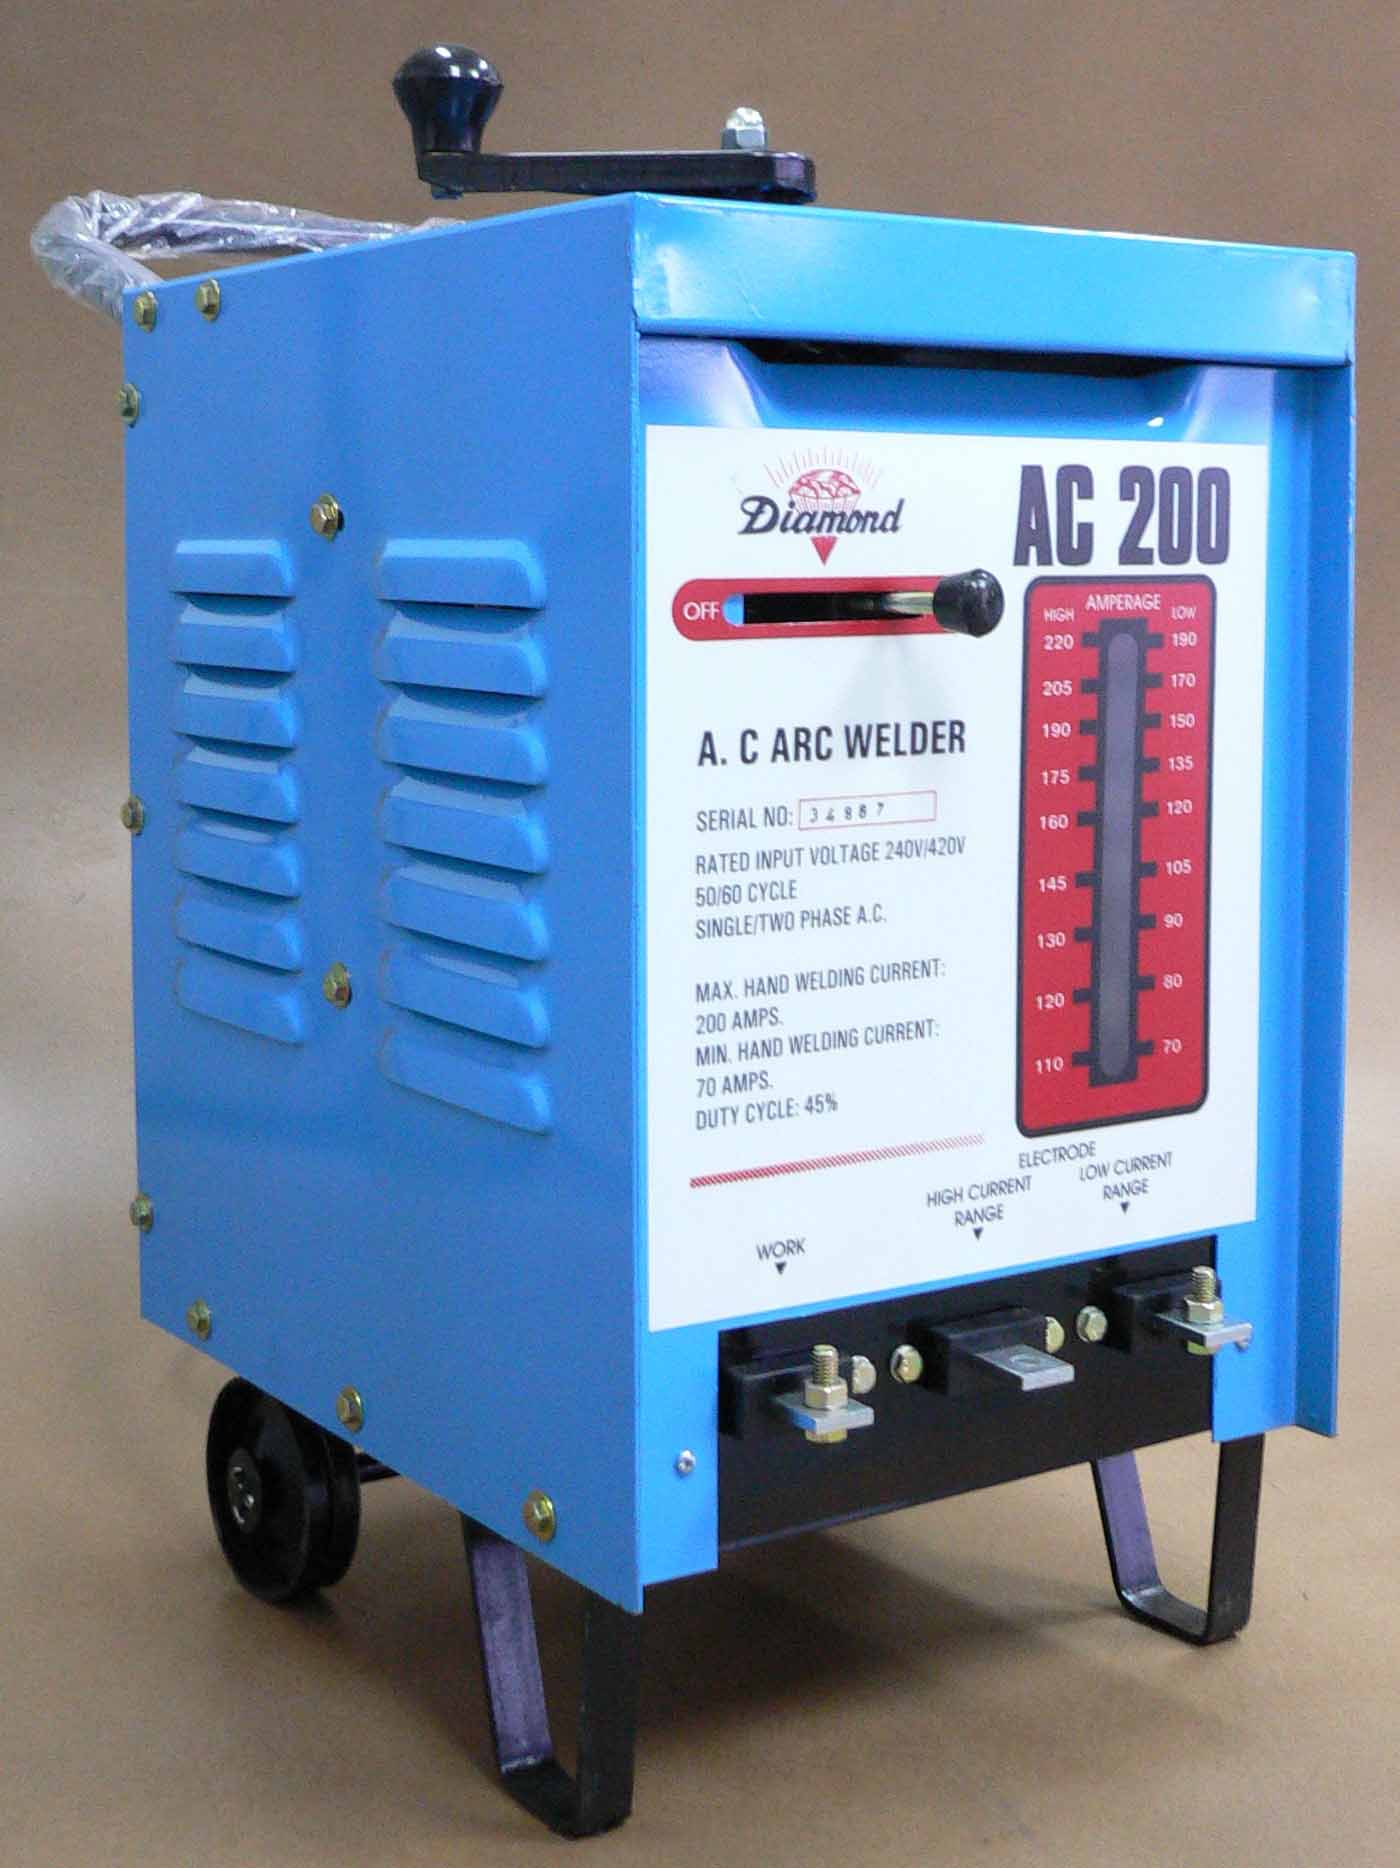 The AC 200 is the modern moveable core current control welding machine. It is heavy duty core impregnated with high temperature varnish to protect against moisture, dust and thermal overload. Fan assisted cooling for greater reliability in heavy applications. It has the welding current ranges from 70A ~ 220A. 